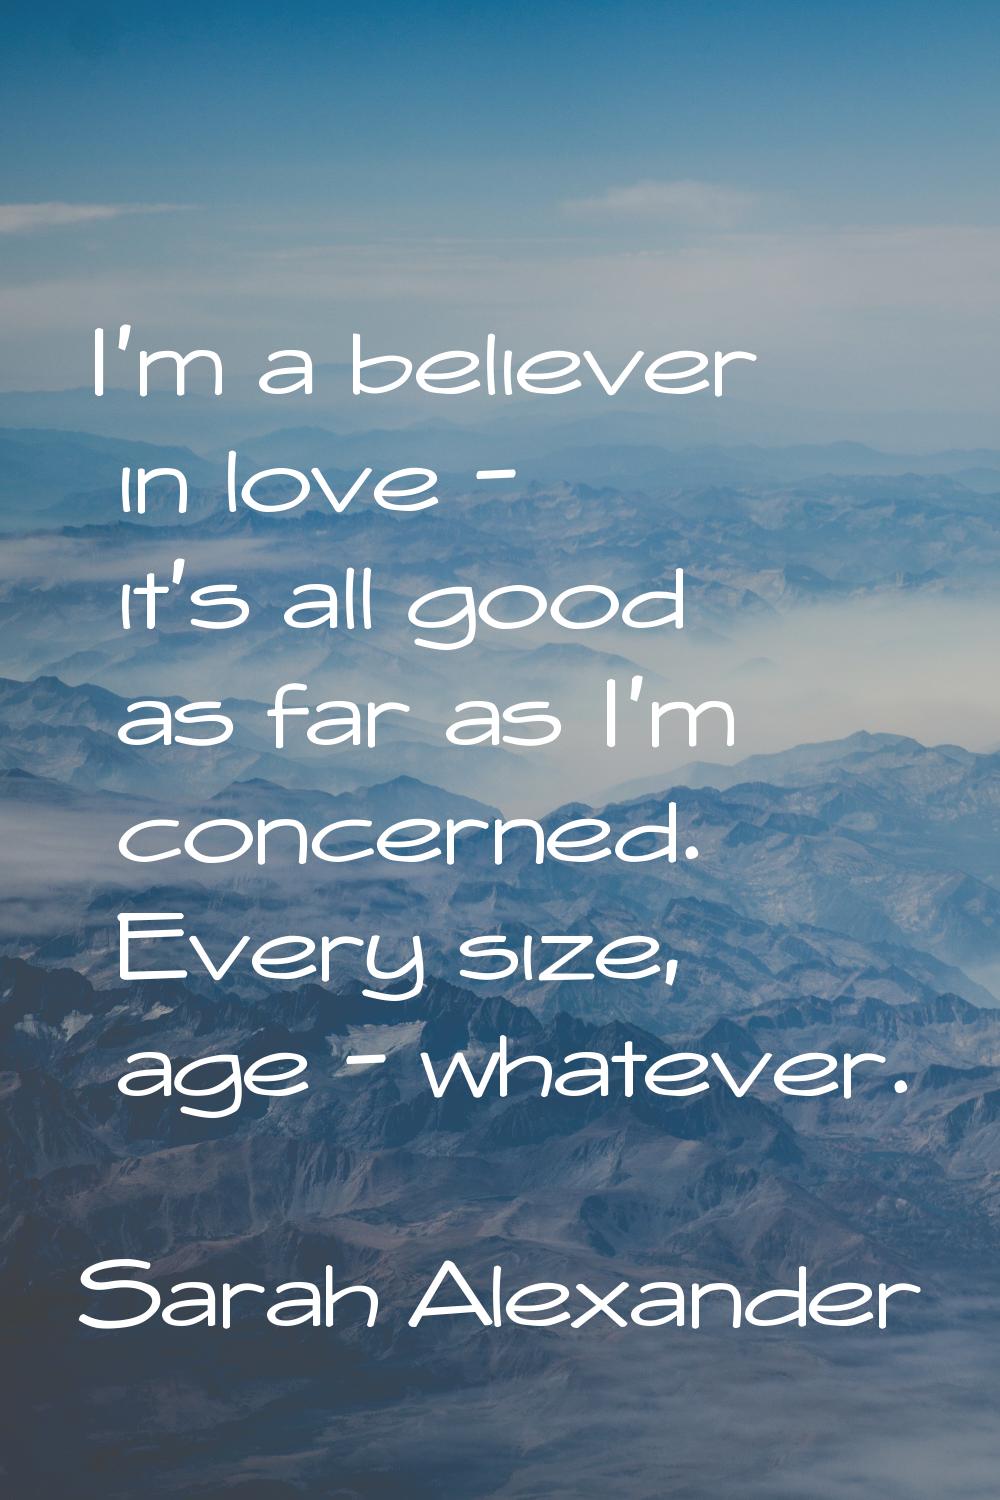 I'm a believer in love - it's all good as far as I'm concerned. Every size, age - whatever.